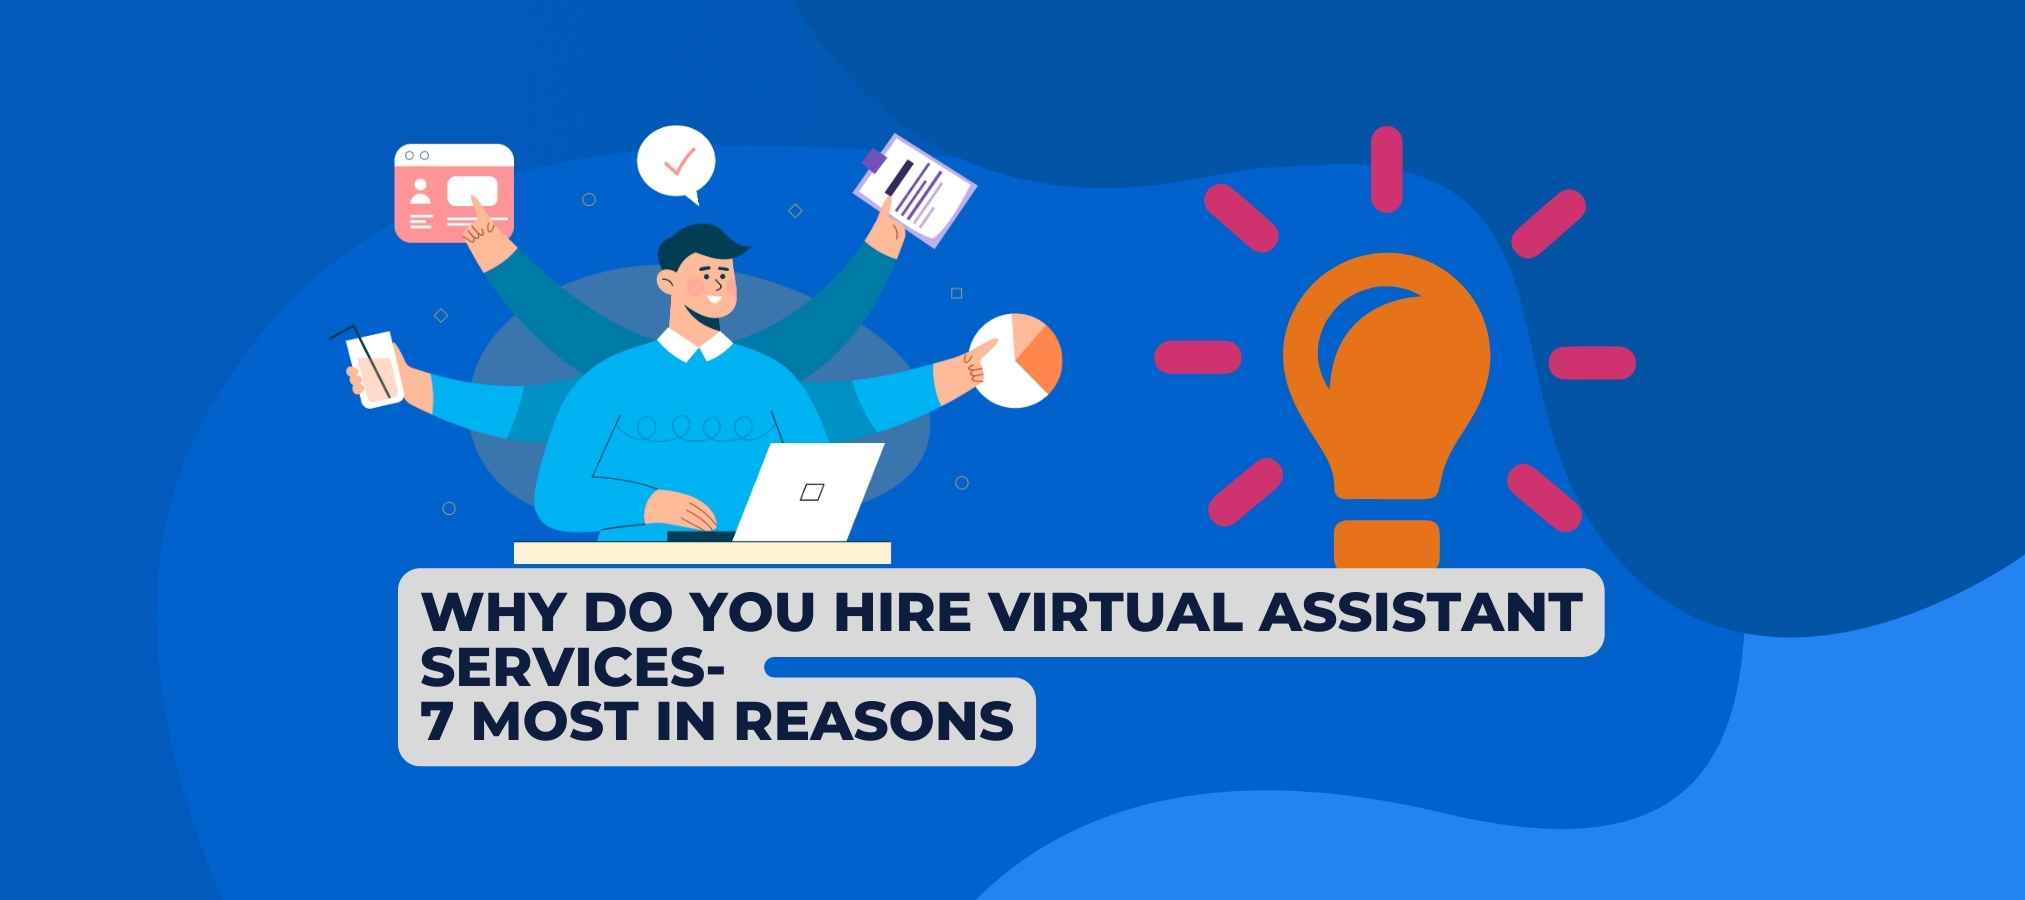 Virtual Assistant Services- 7 Most In Reasons